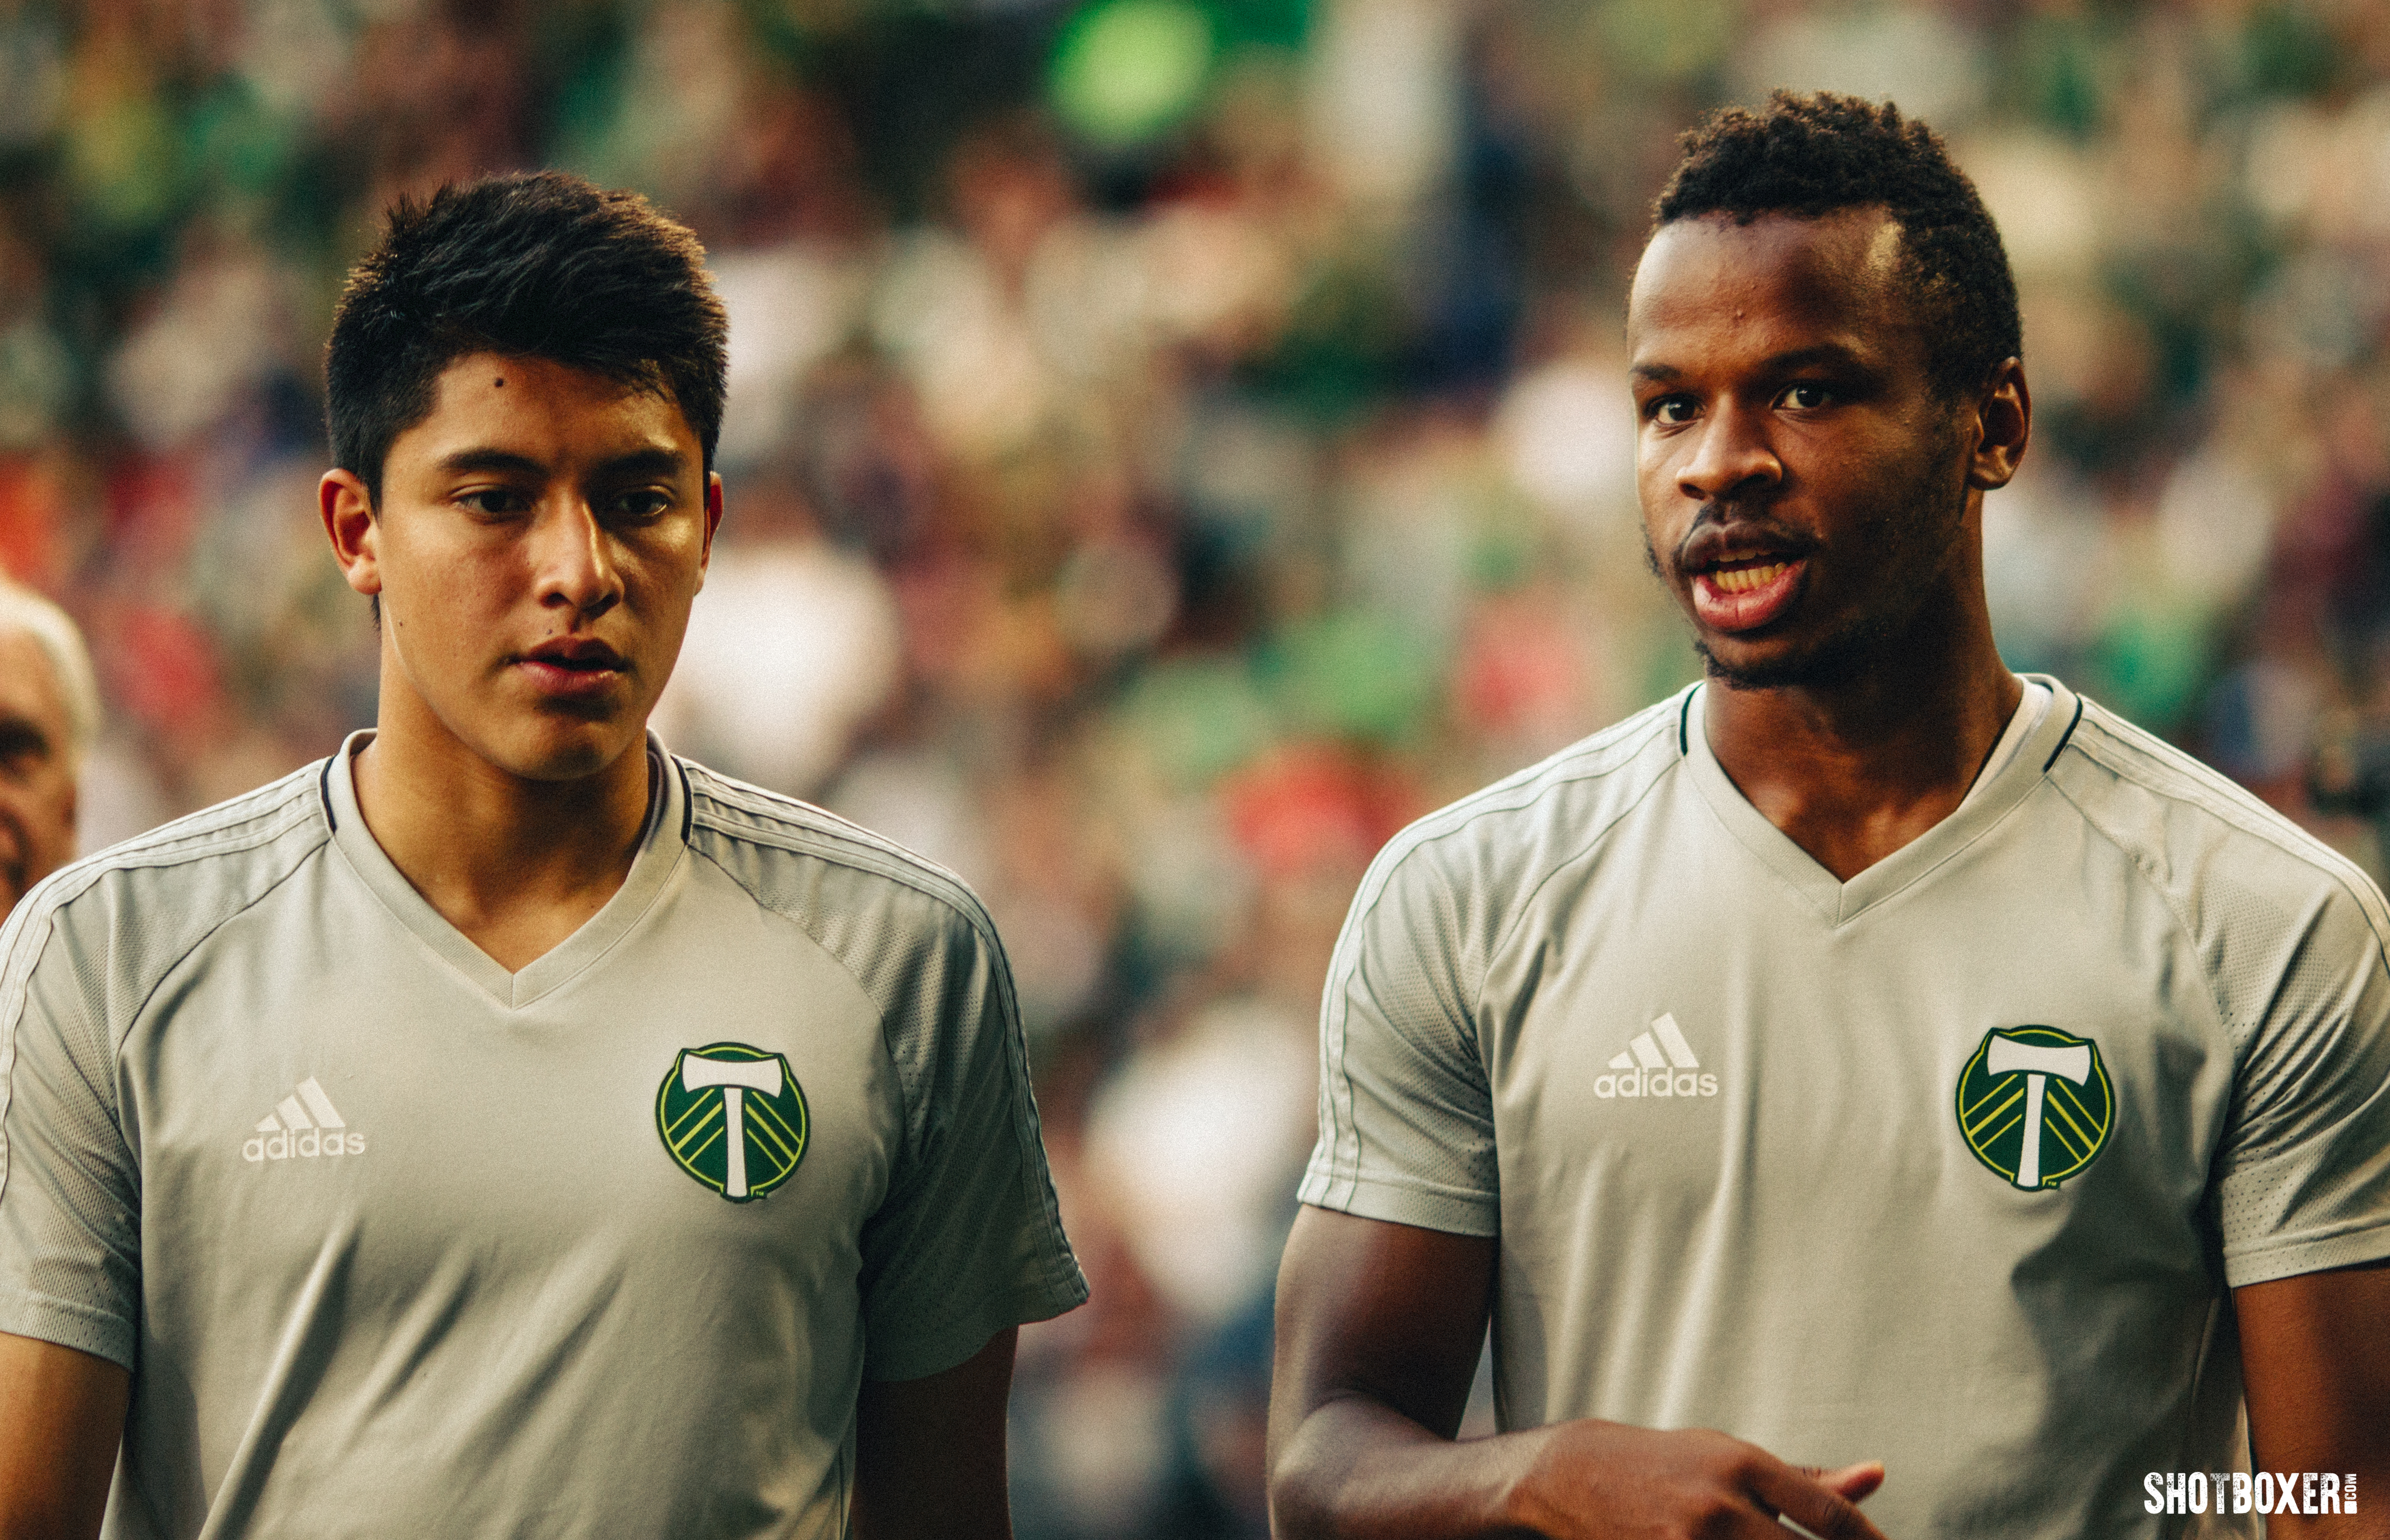 Match Gallery: Portland Timbers vs. Seattle Sounders